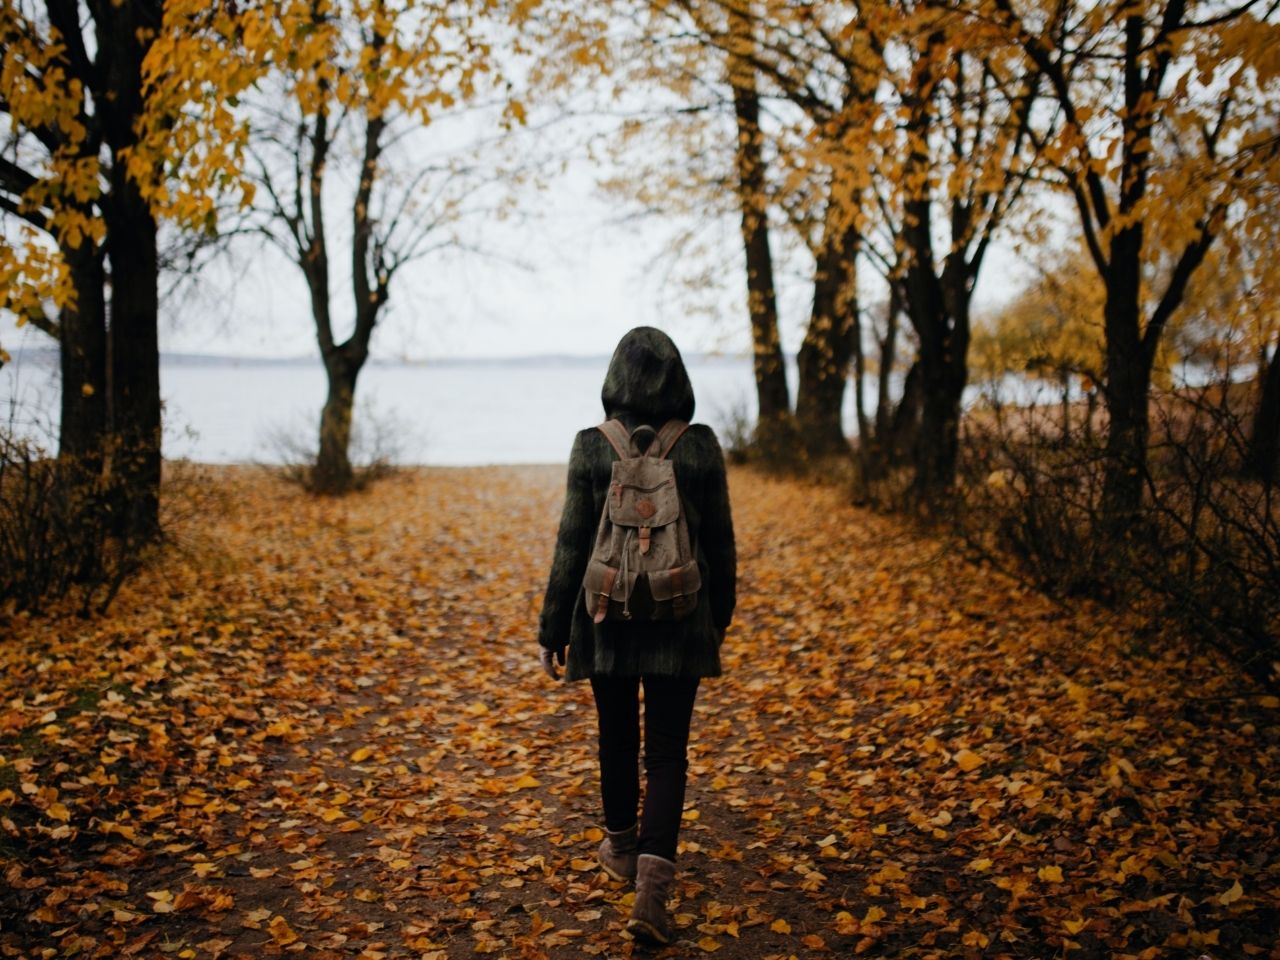 Woman walking o a road of leaves